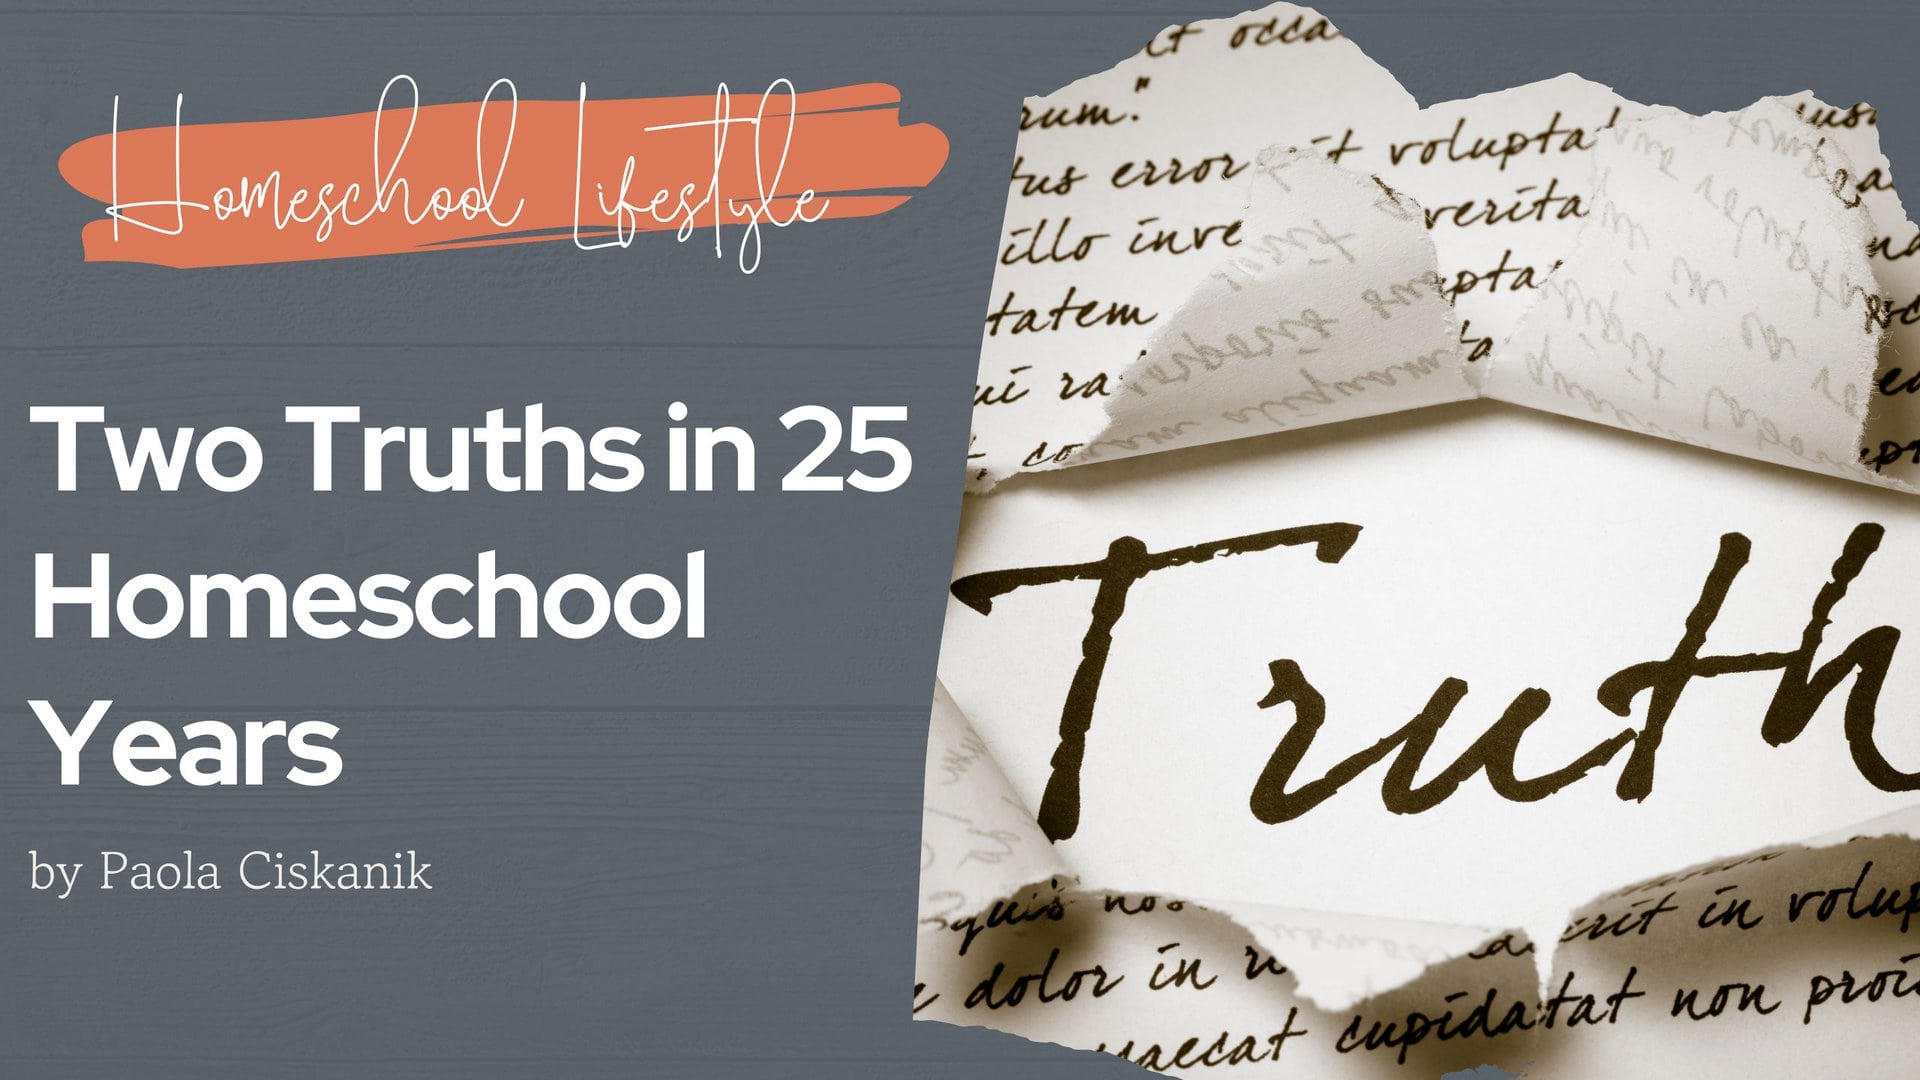 Two Truths in 25 Years of Homeschooling